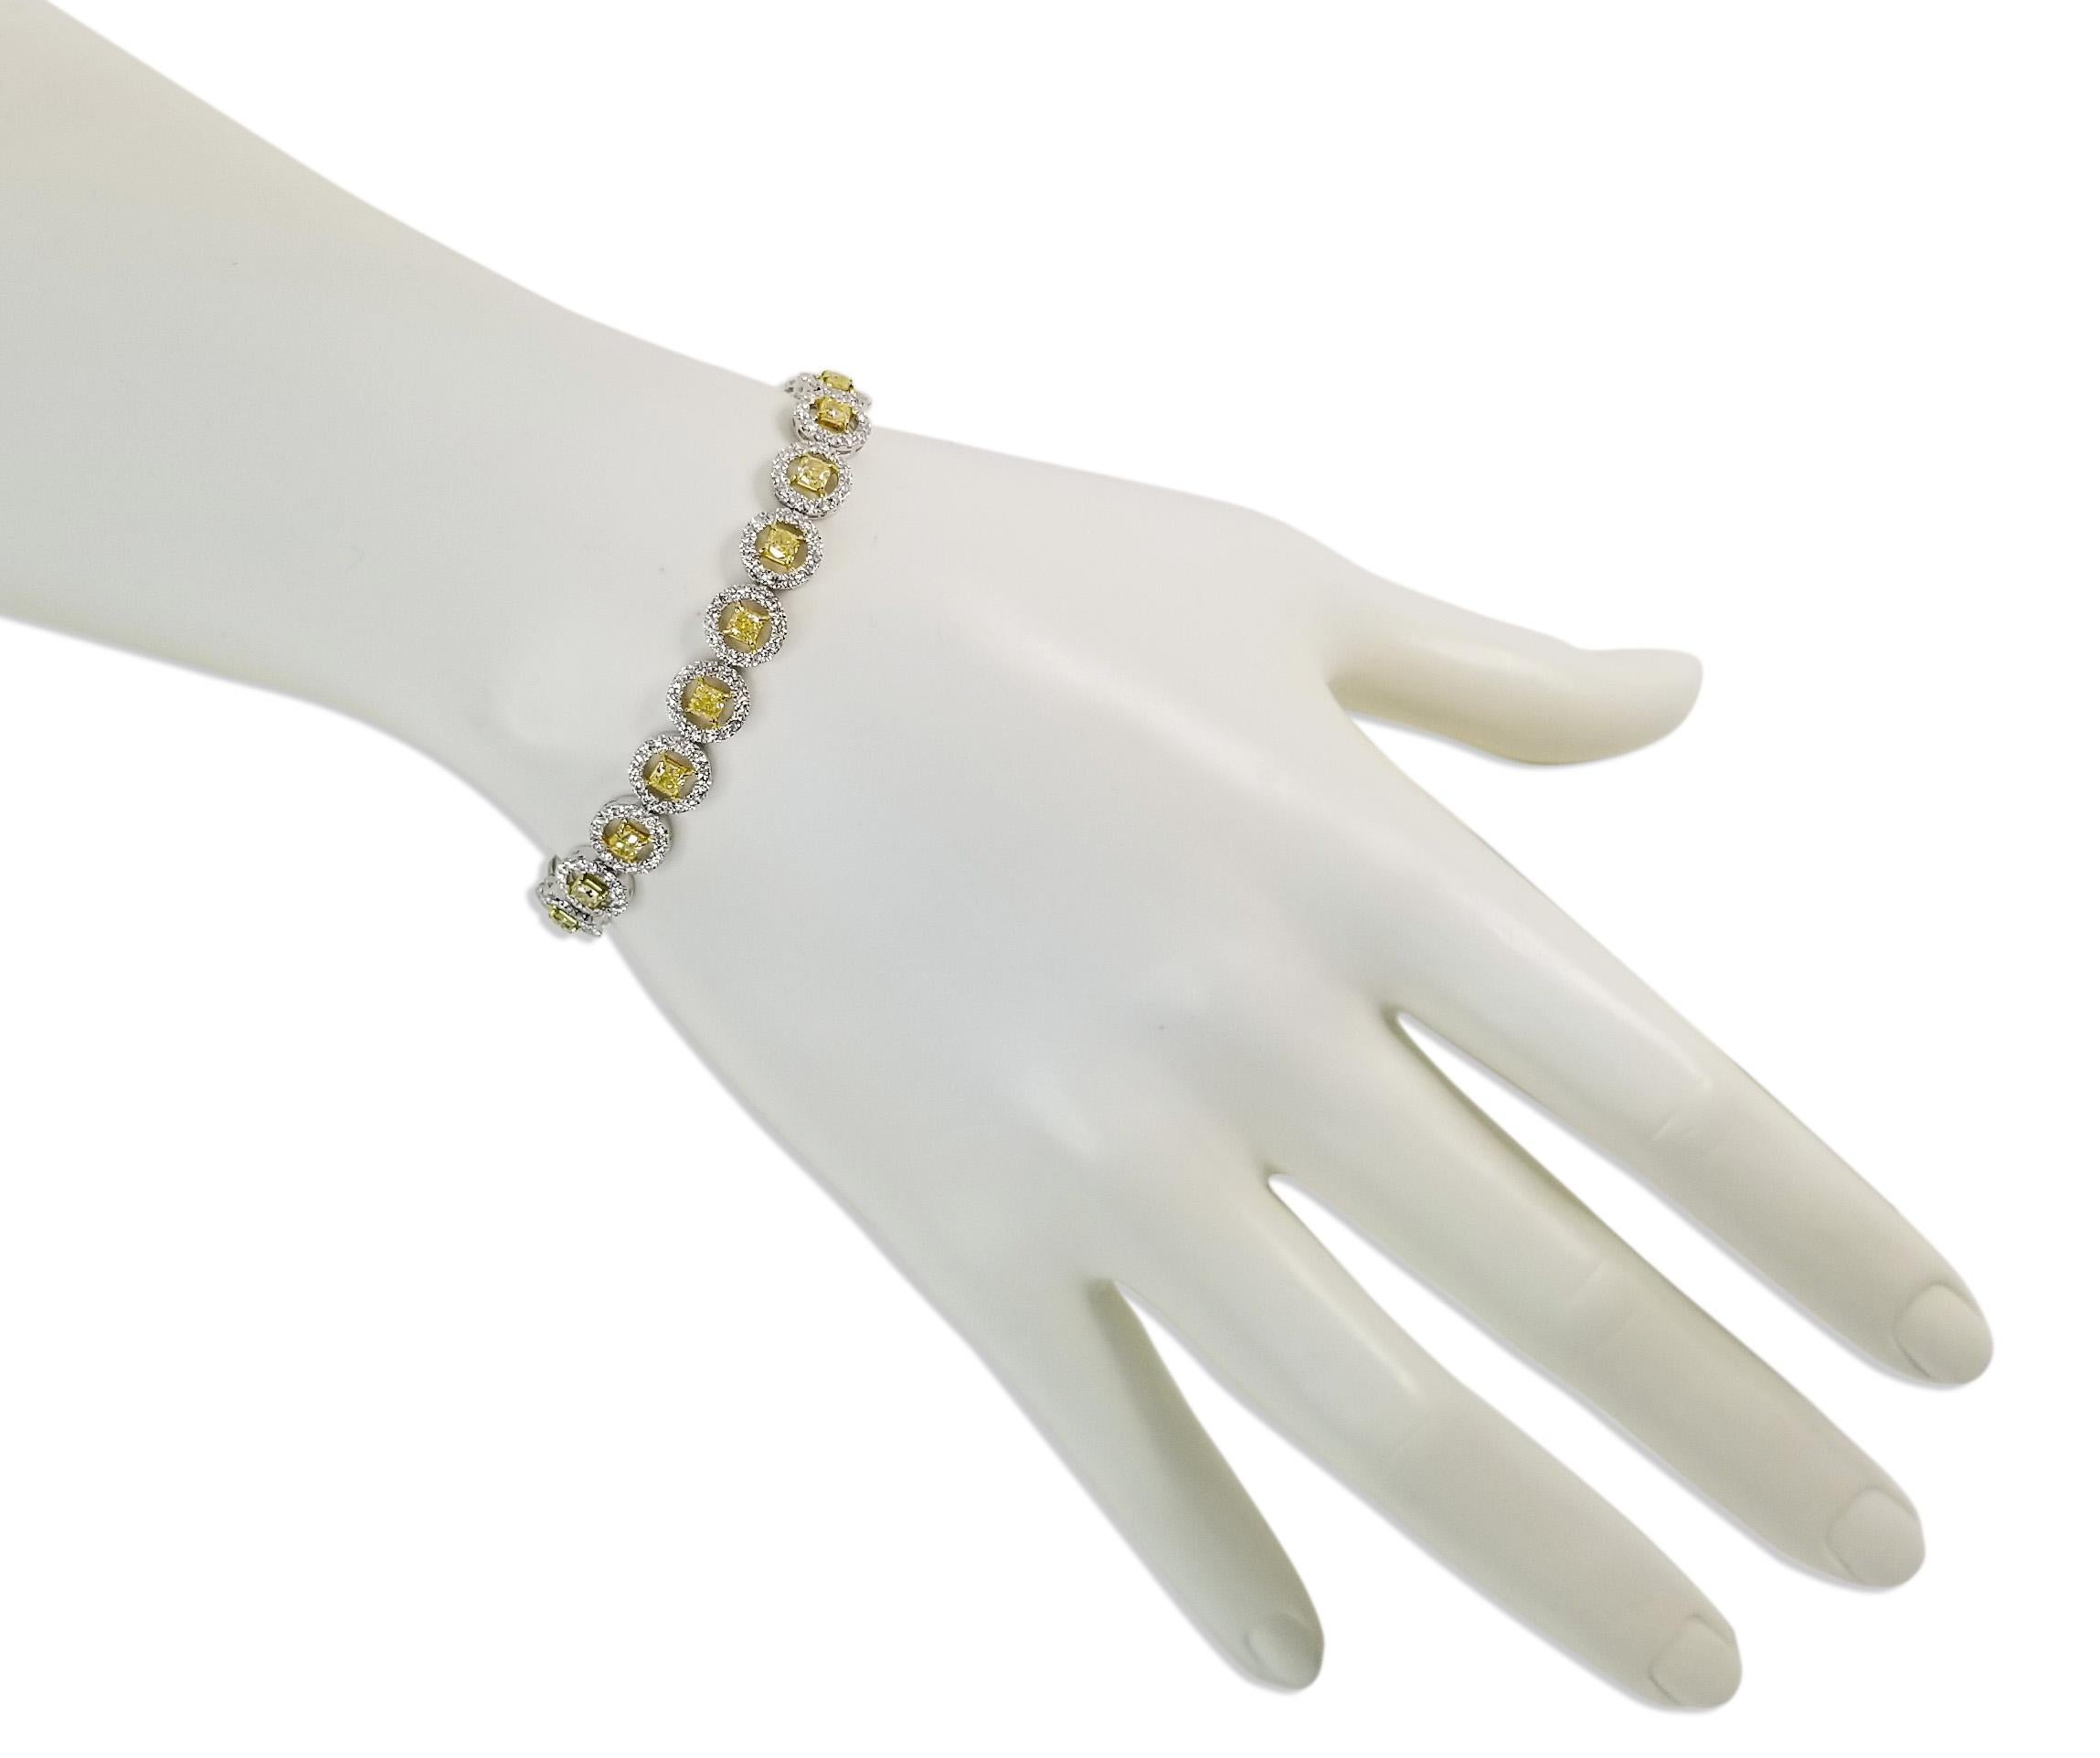 SCARSELLI, is featuring a 18k gold and platinum Line bracelet with 3.41 carat of Fancy Intense Yellow diamonds total of 22 stones along with 3.27carats of white round brilliant diamonds. The bracelet fits a 6